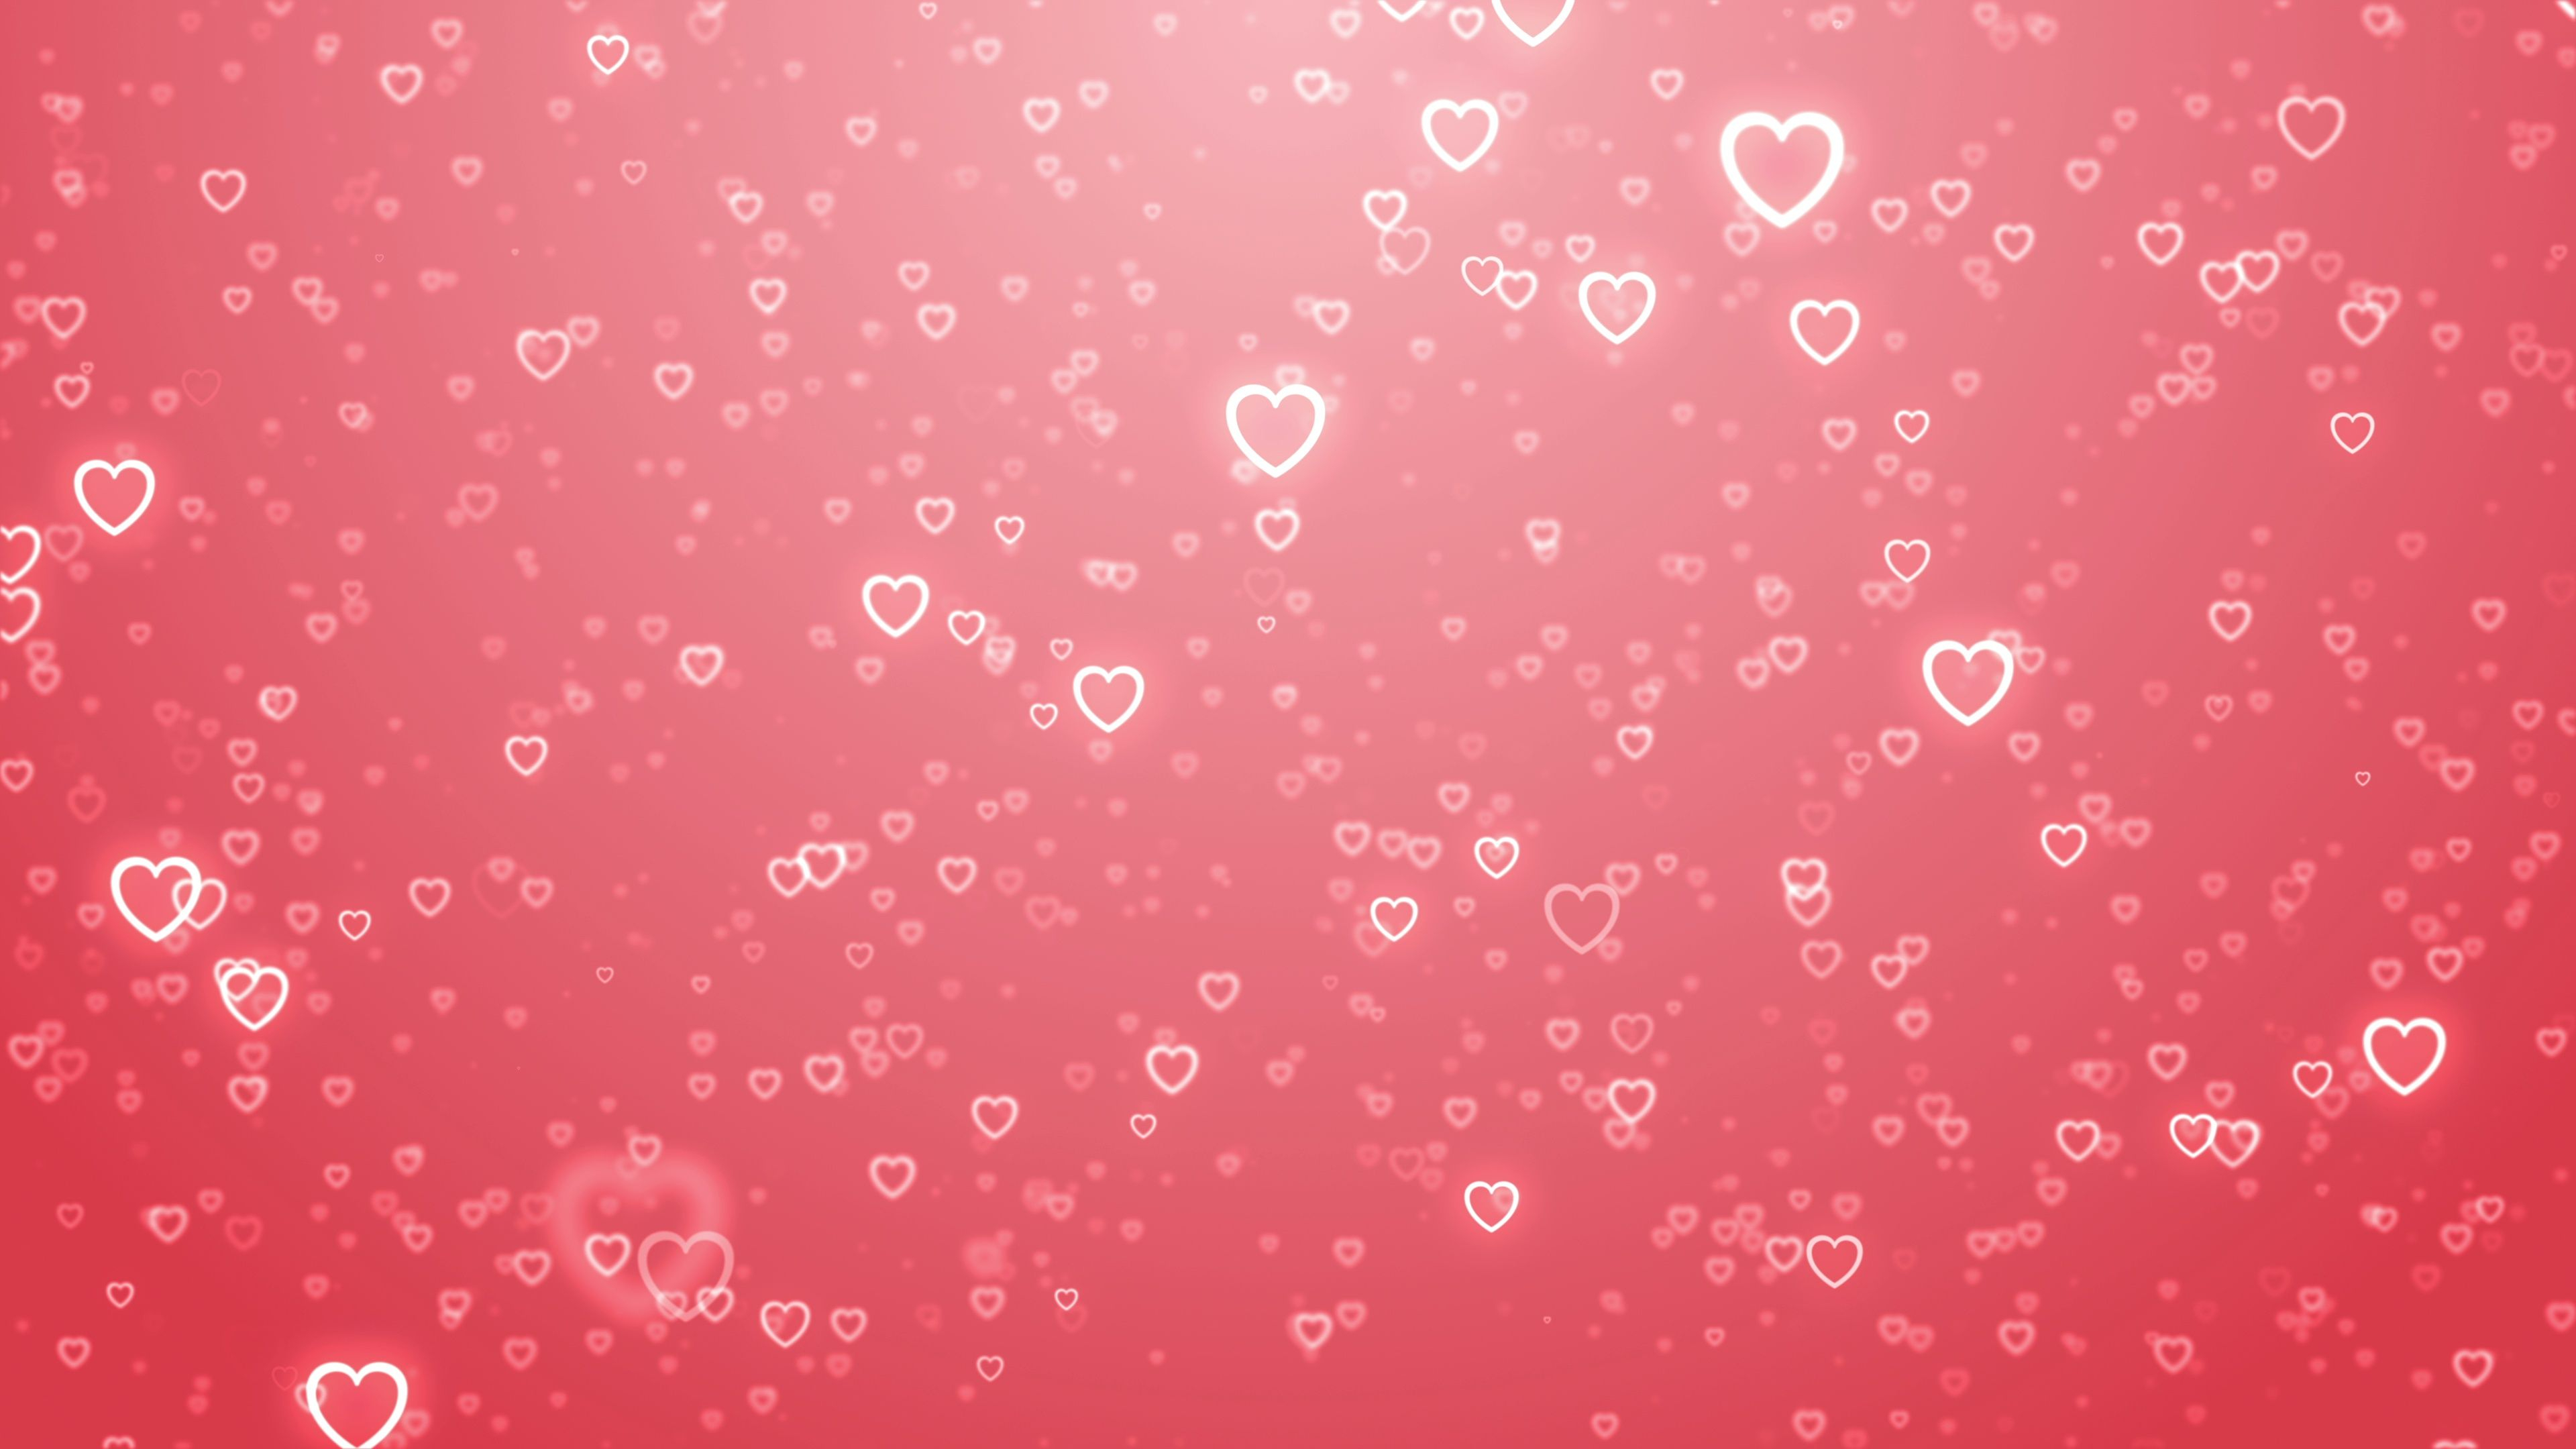 Wedding Anniversary Wallpapers and Backgrounds 4K, HD, Dual Screen